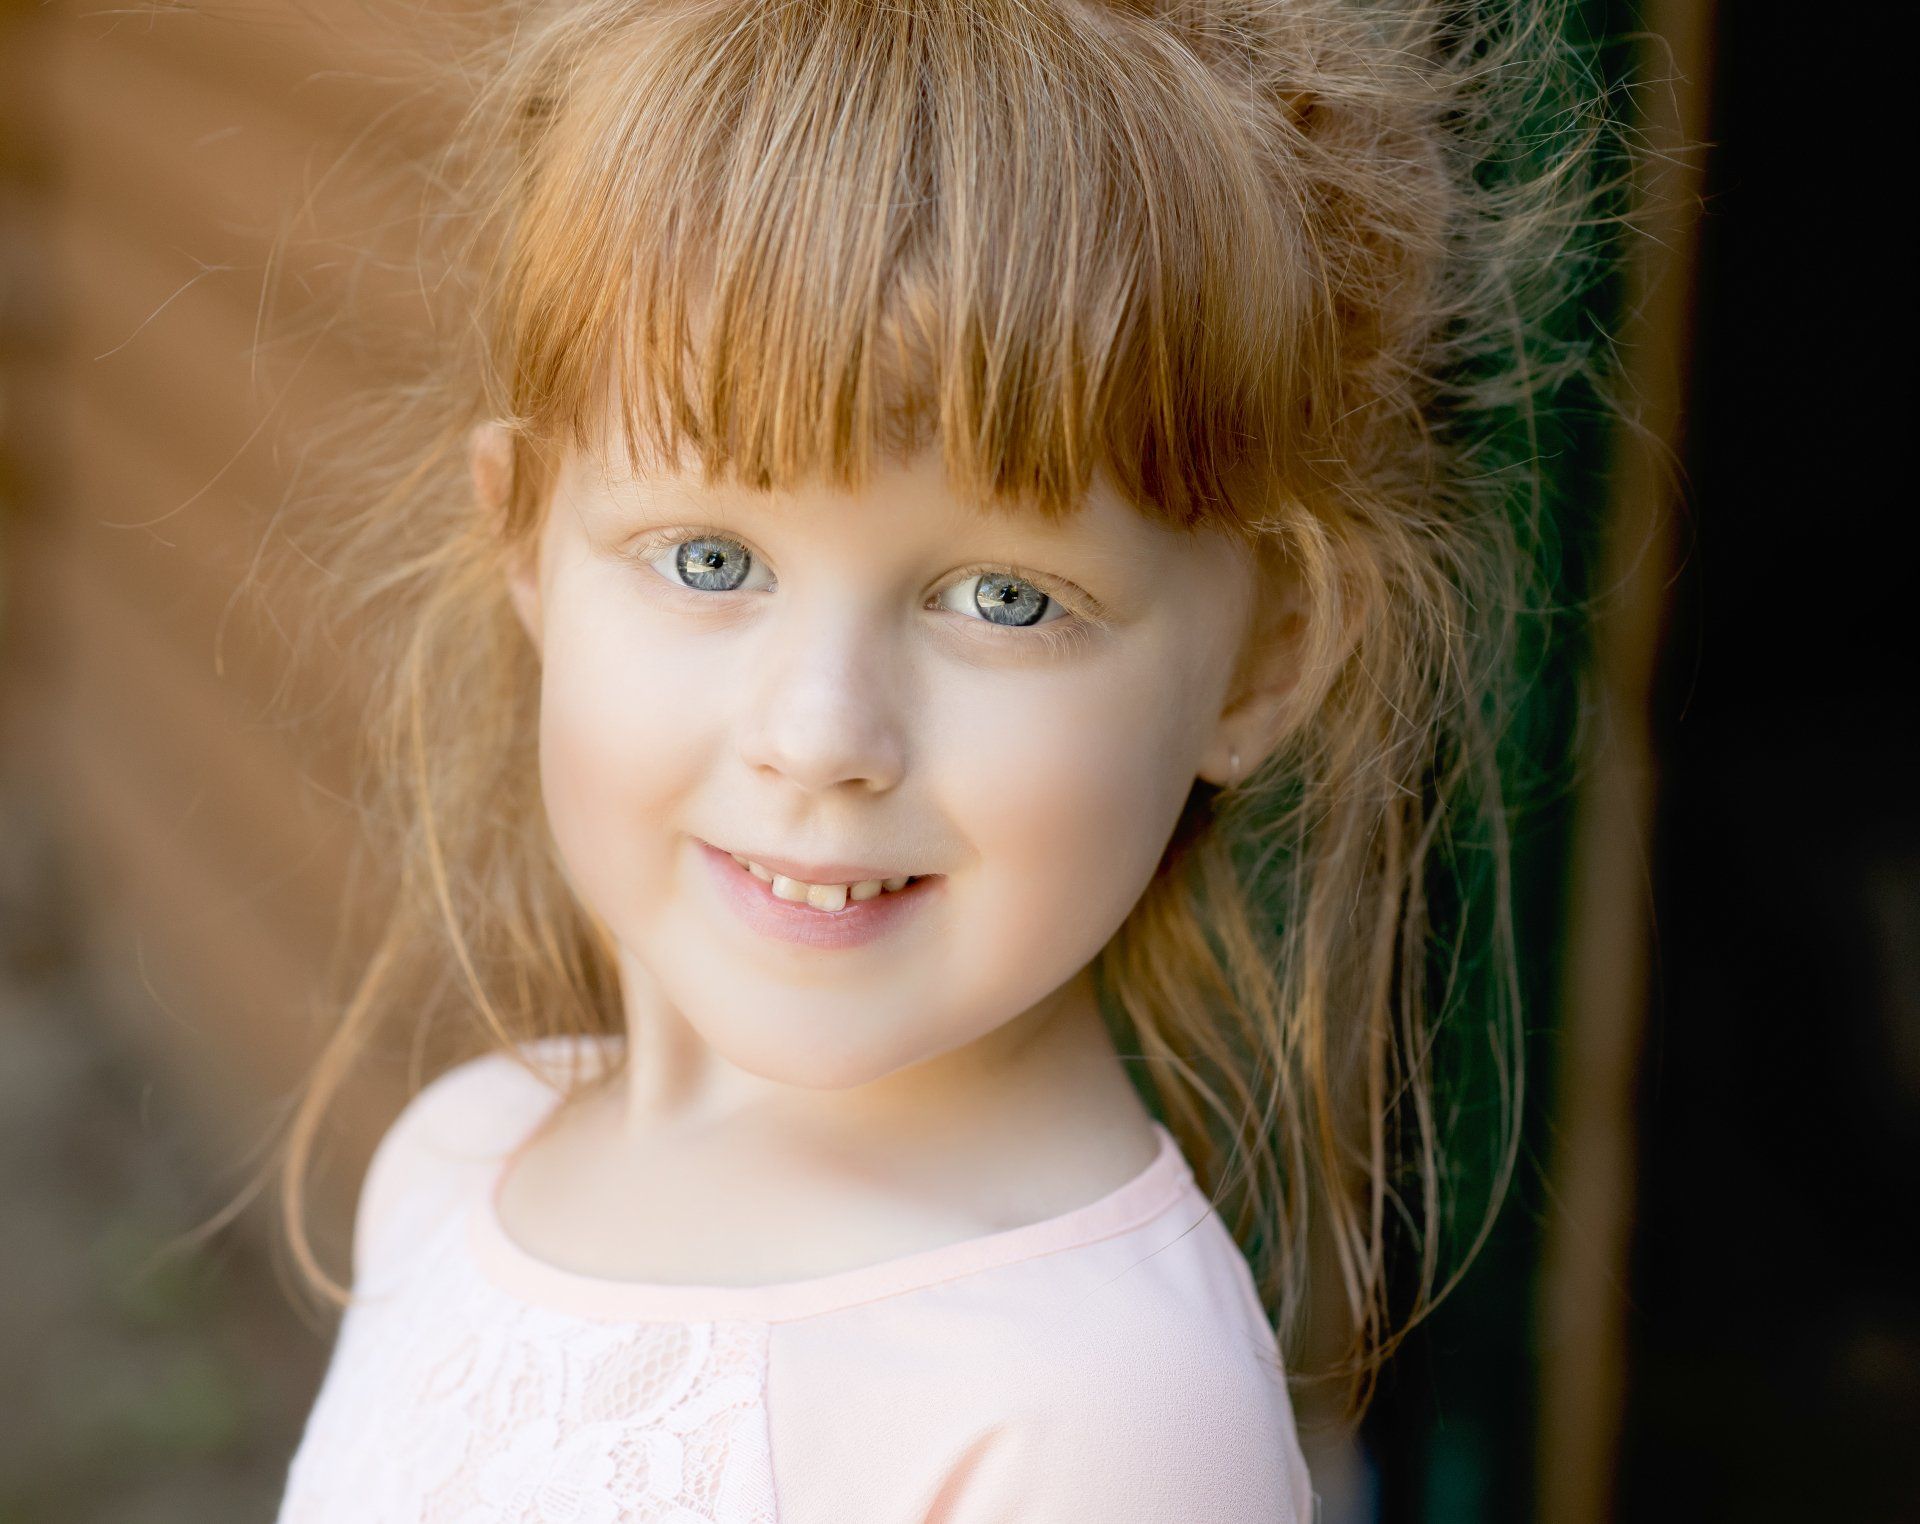 Young girl 3 |  Child photography | Stacey Naglie Toronto